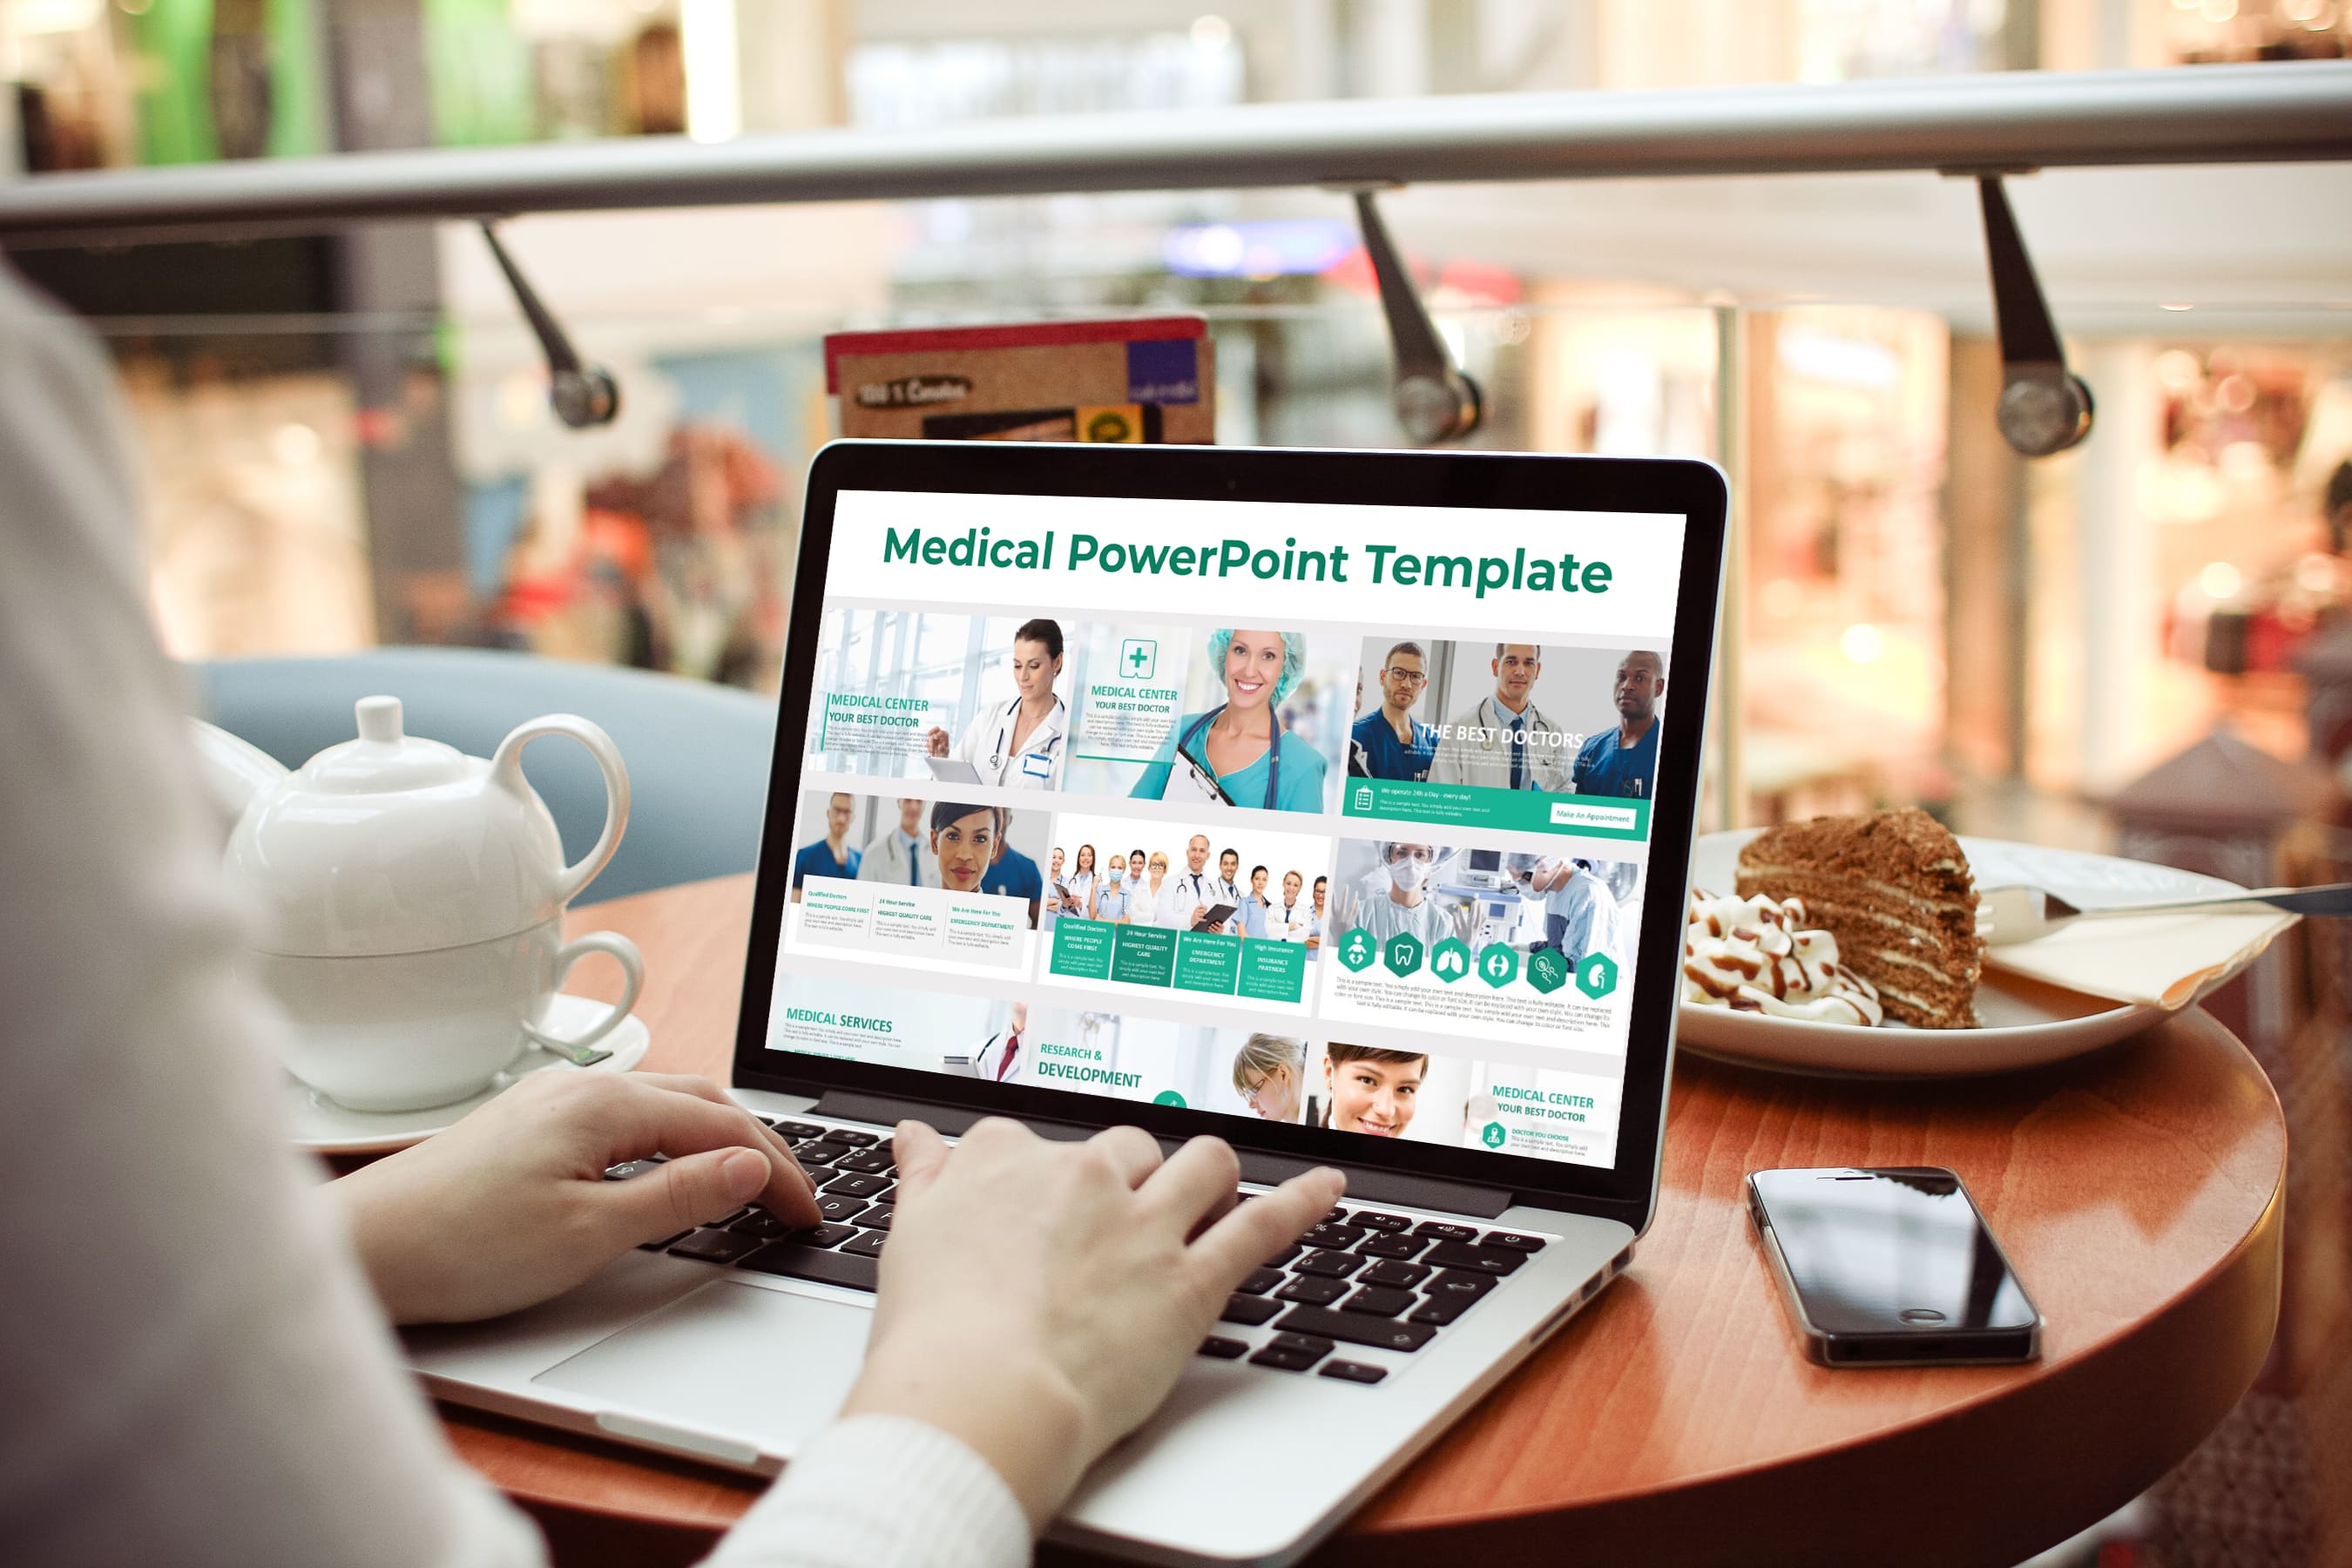 Laptop option of the Medical PowerPoint Template Pinterest.